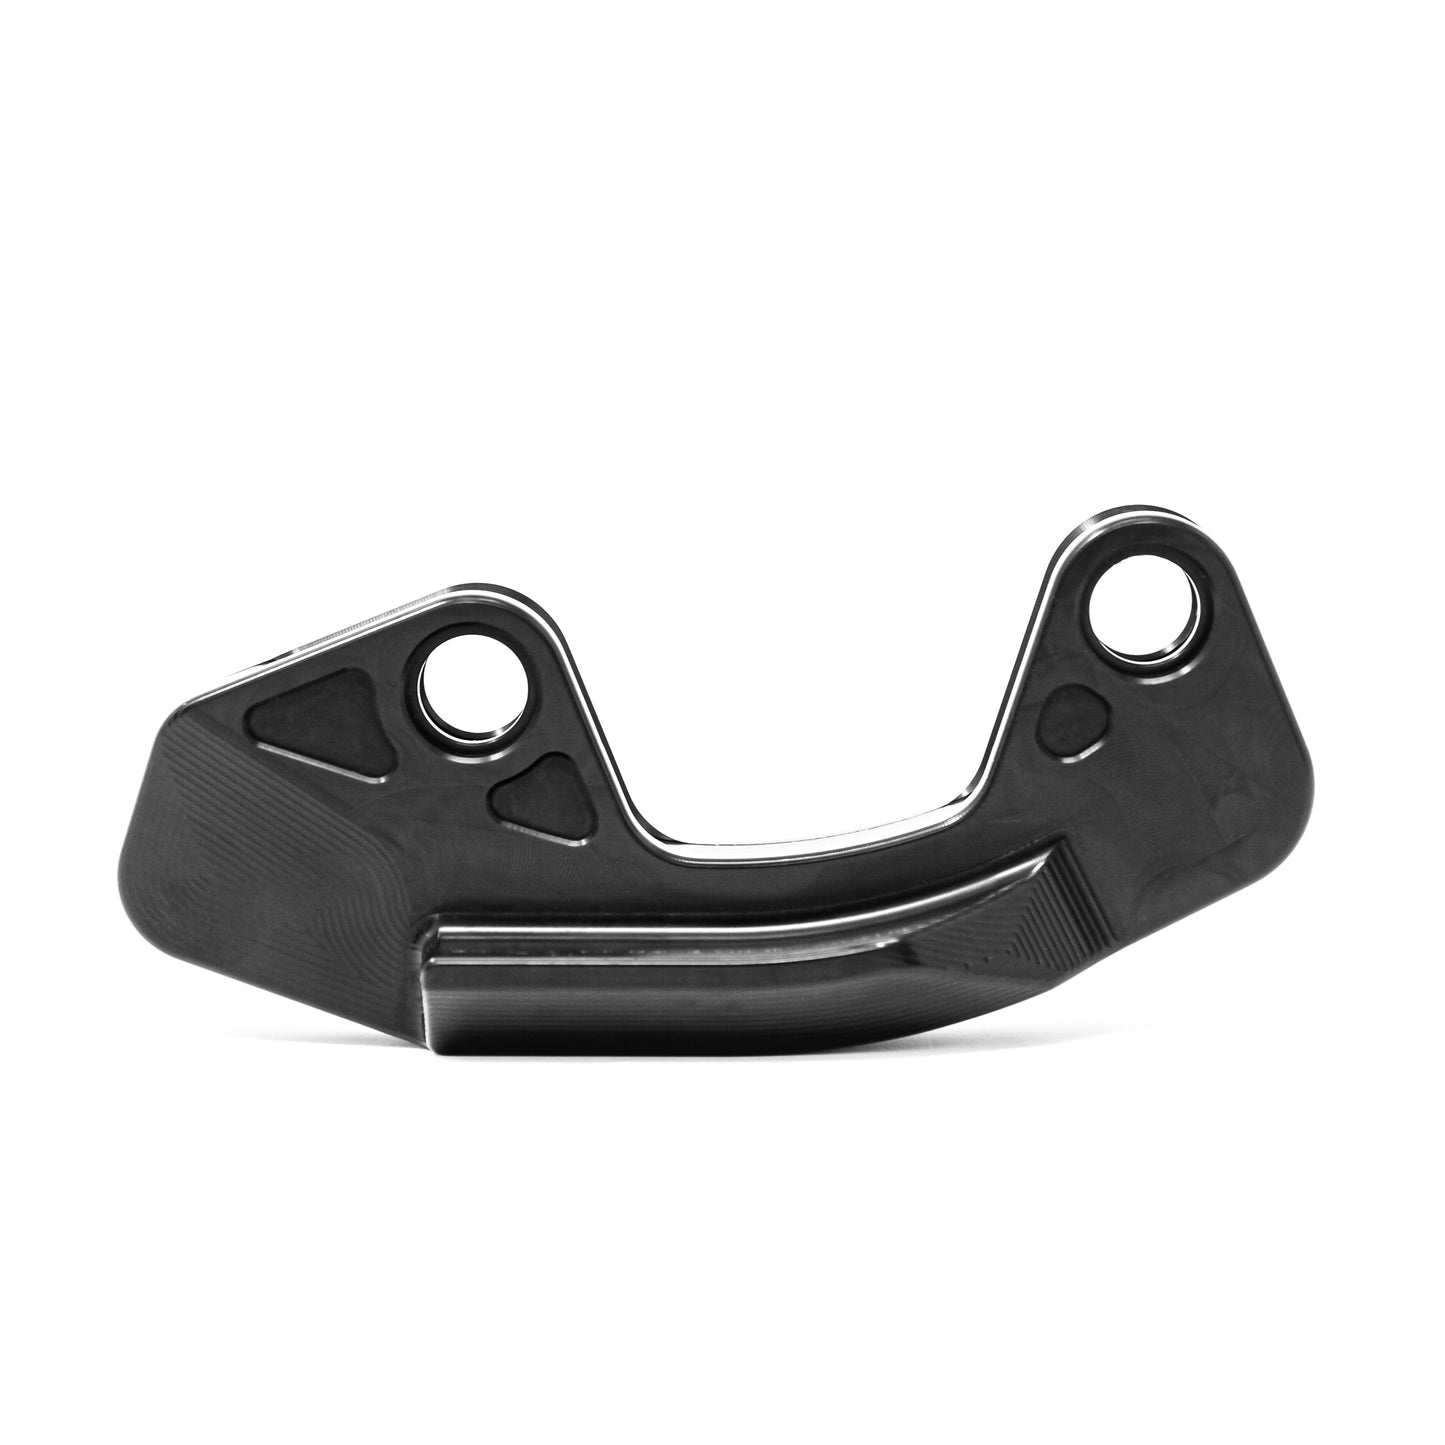 ISCG 05 Spare Lower Guide Bash Plastic 30 Tooth